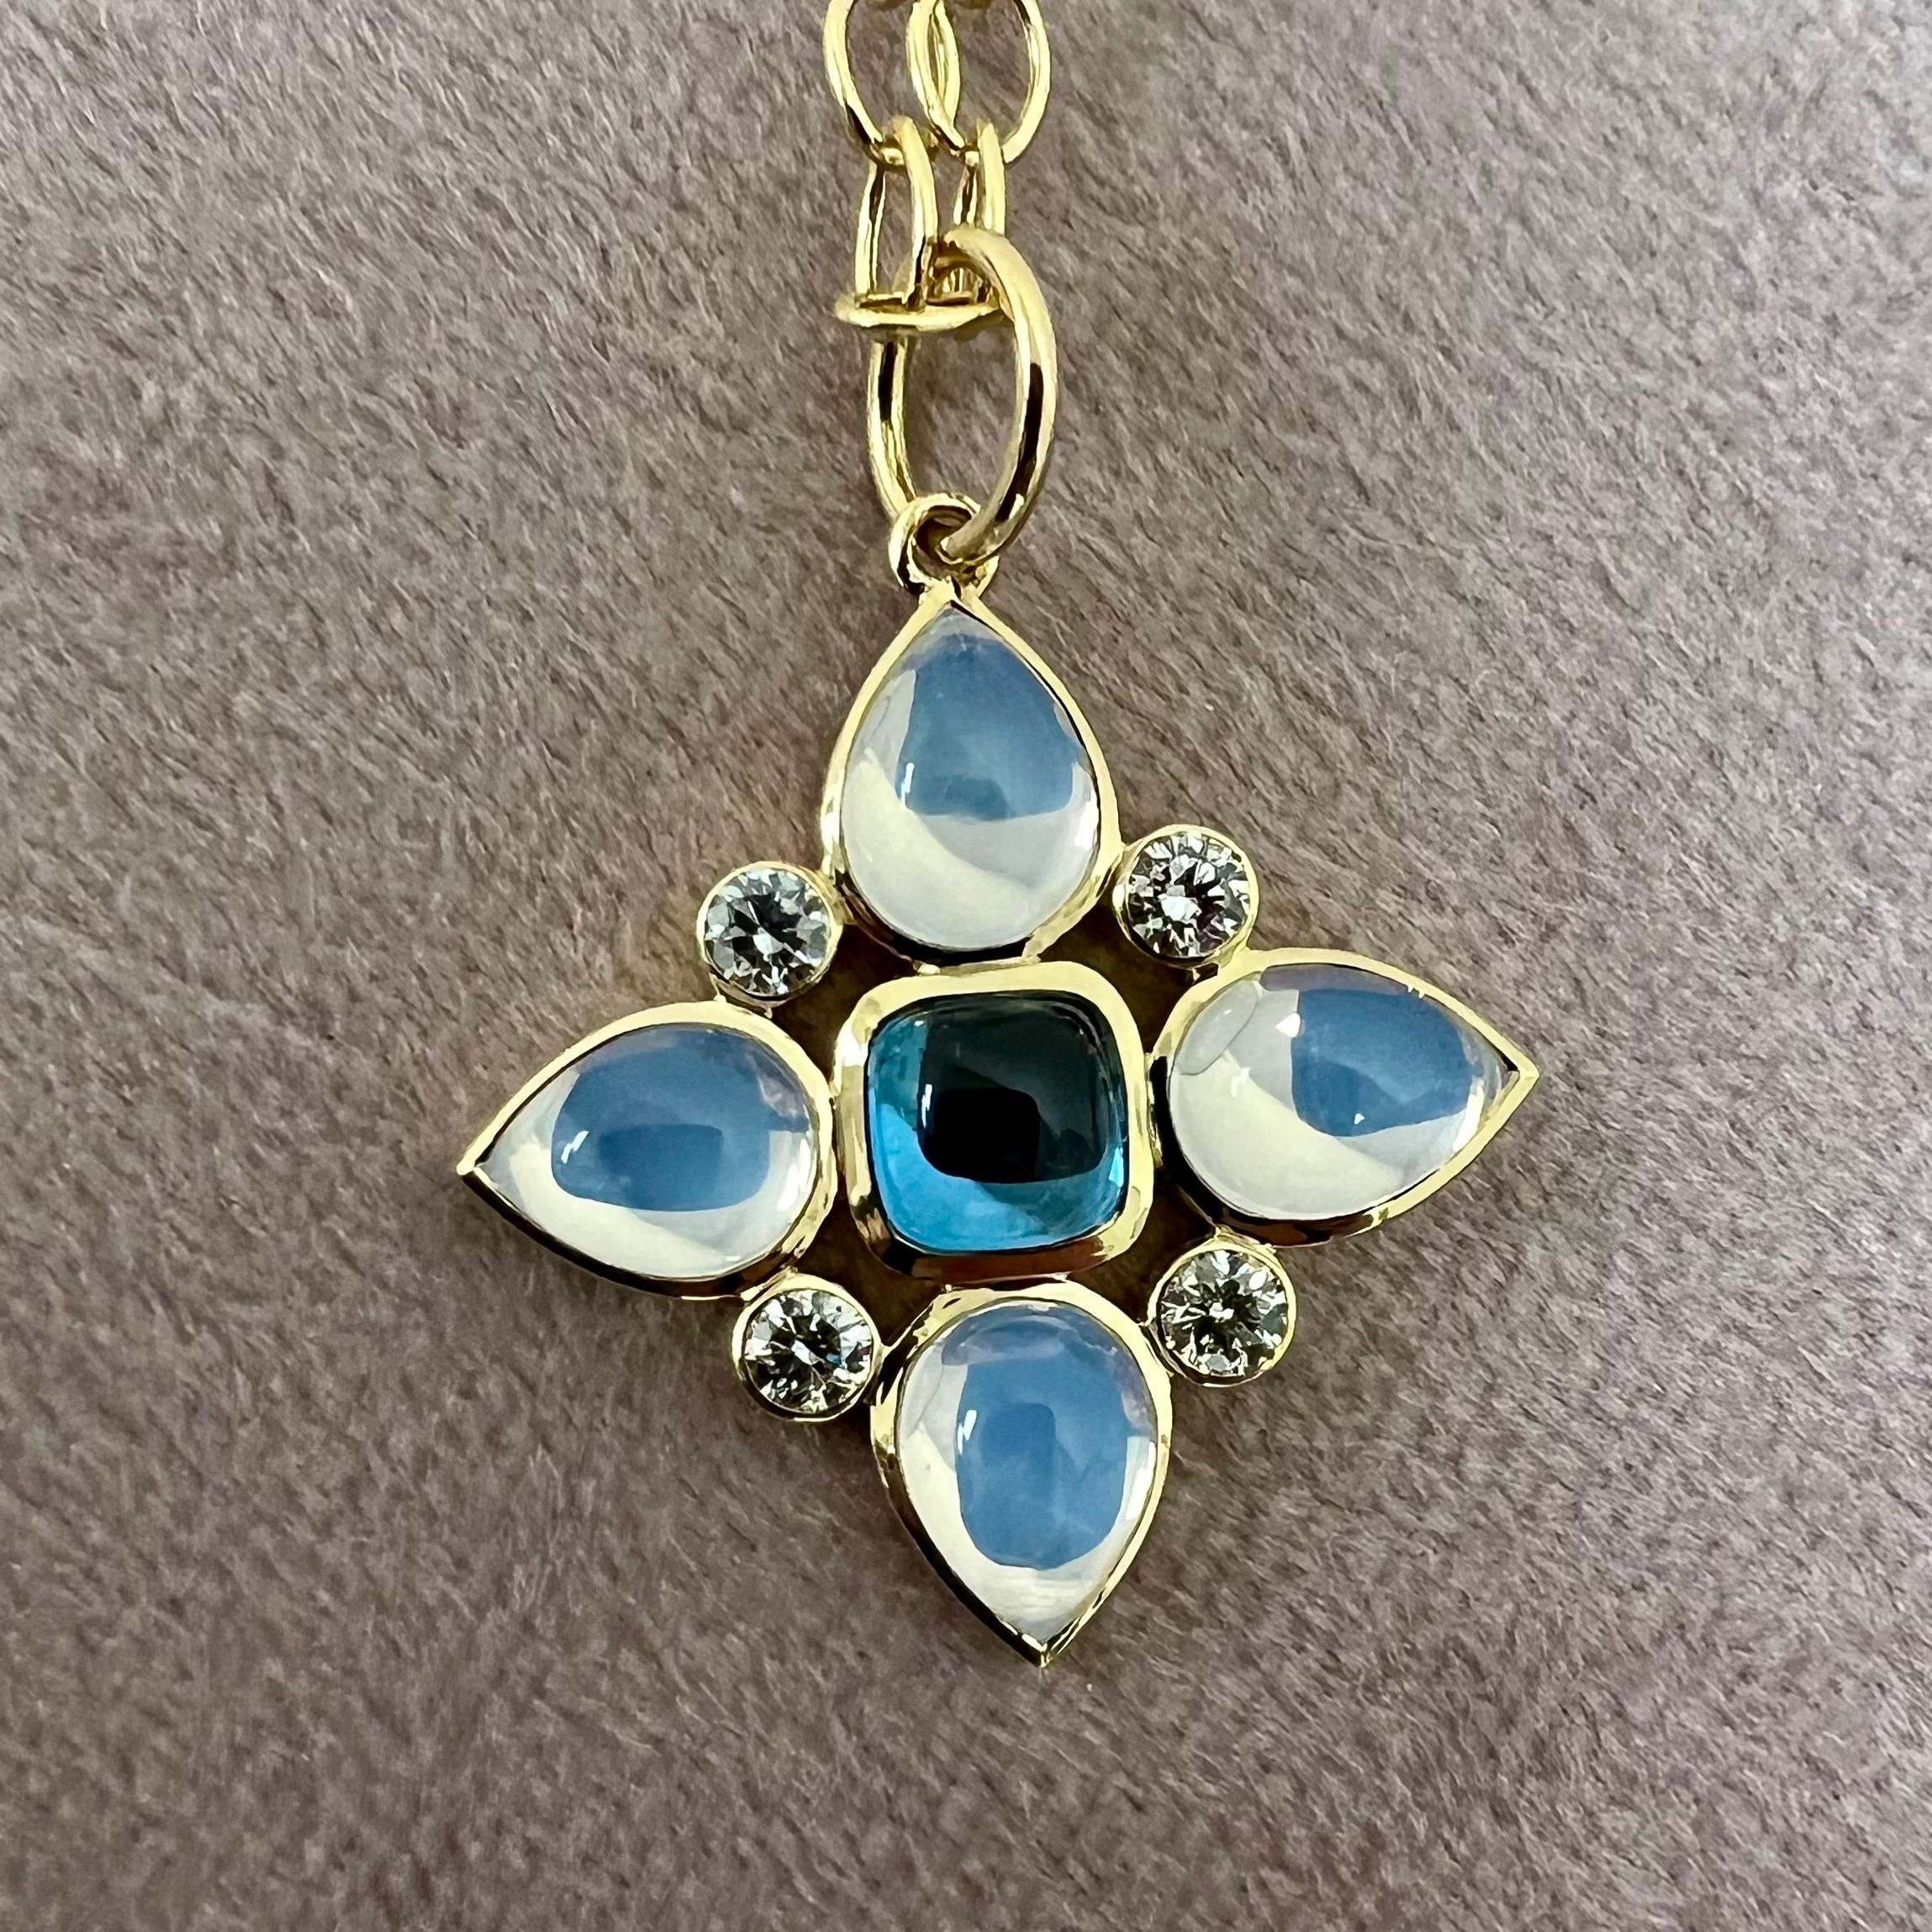 Contemporary Syna Yellow Gold London Blue Topaz and Moon Quartz Flower Pendant with Diamonds